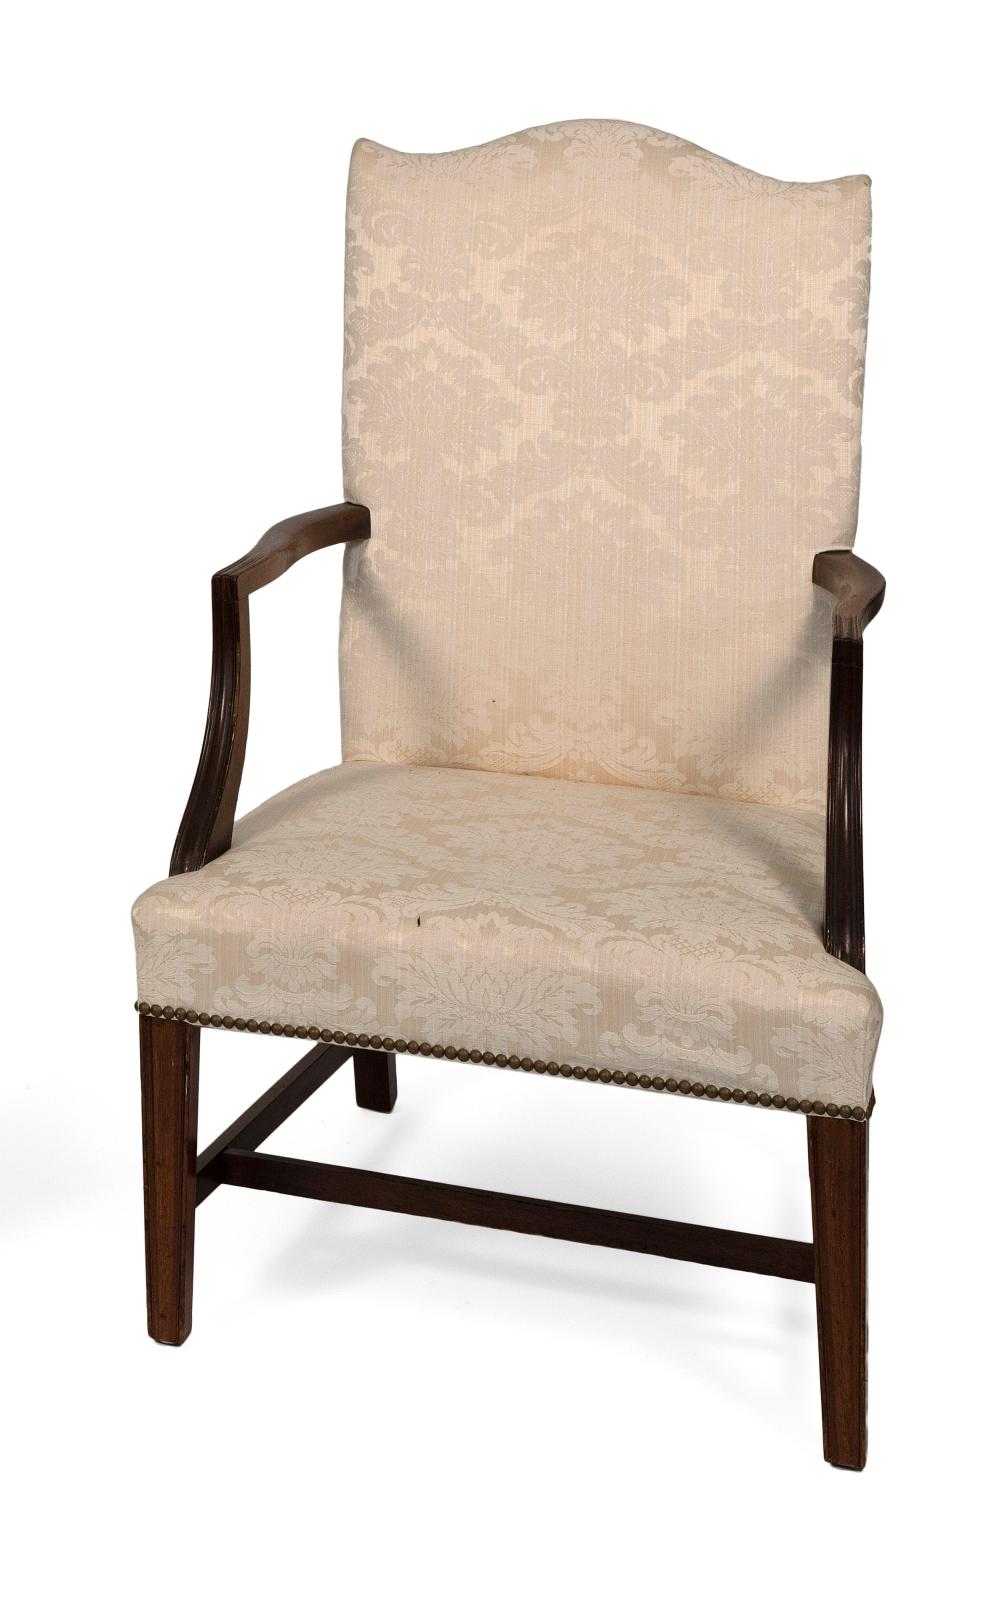 FEDERAL-STYLE LOLLING CHAIR CIRCA